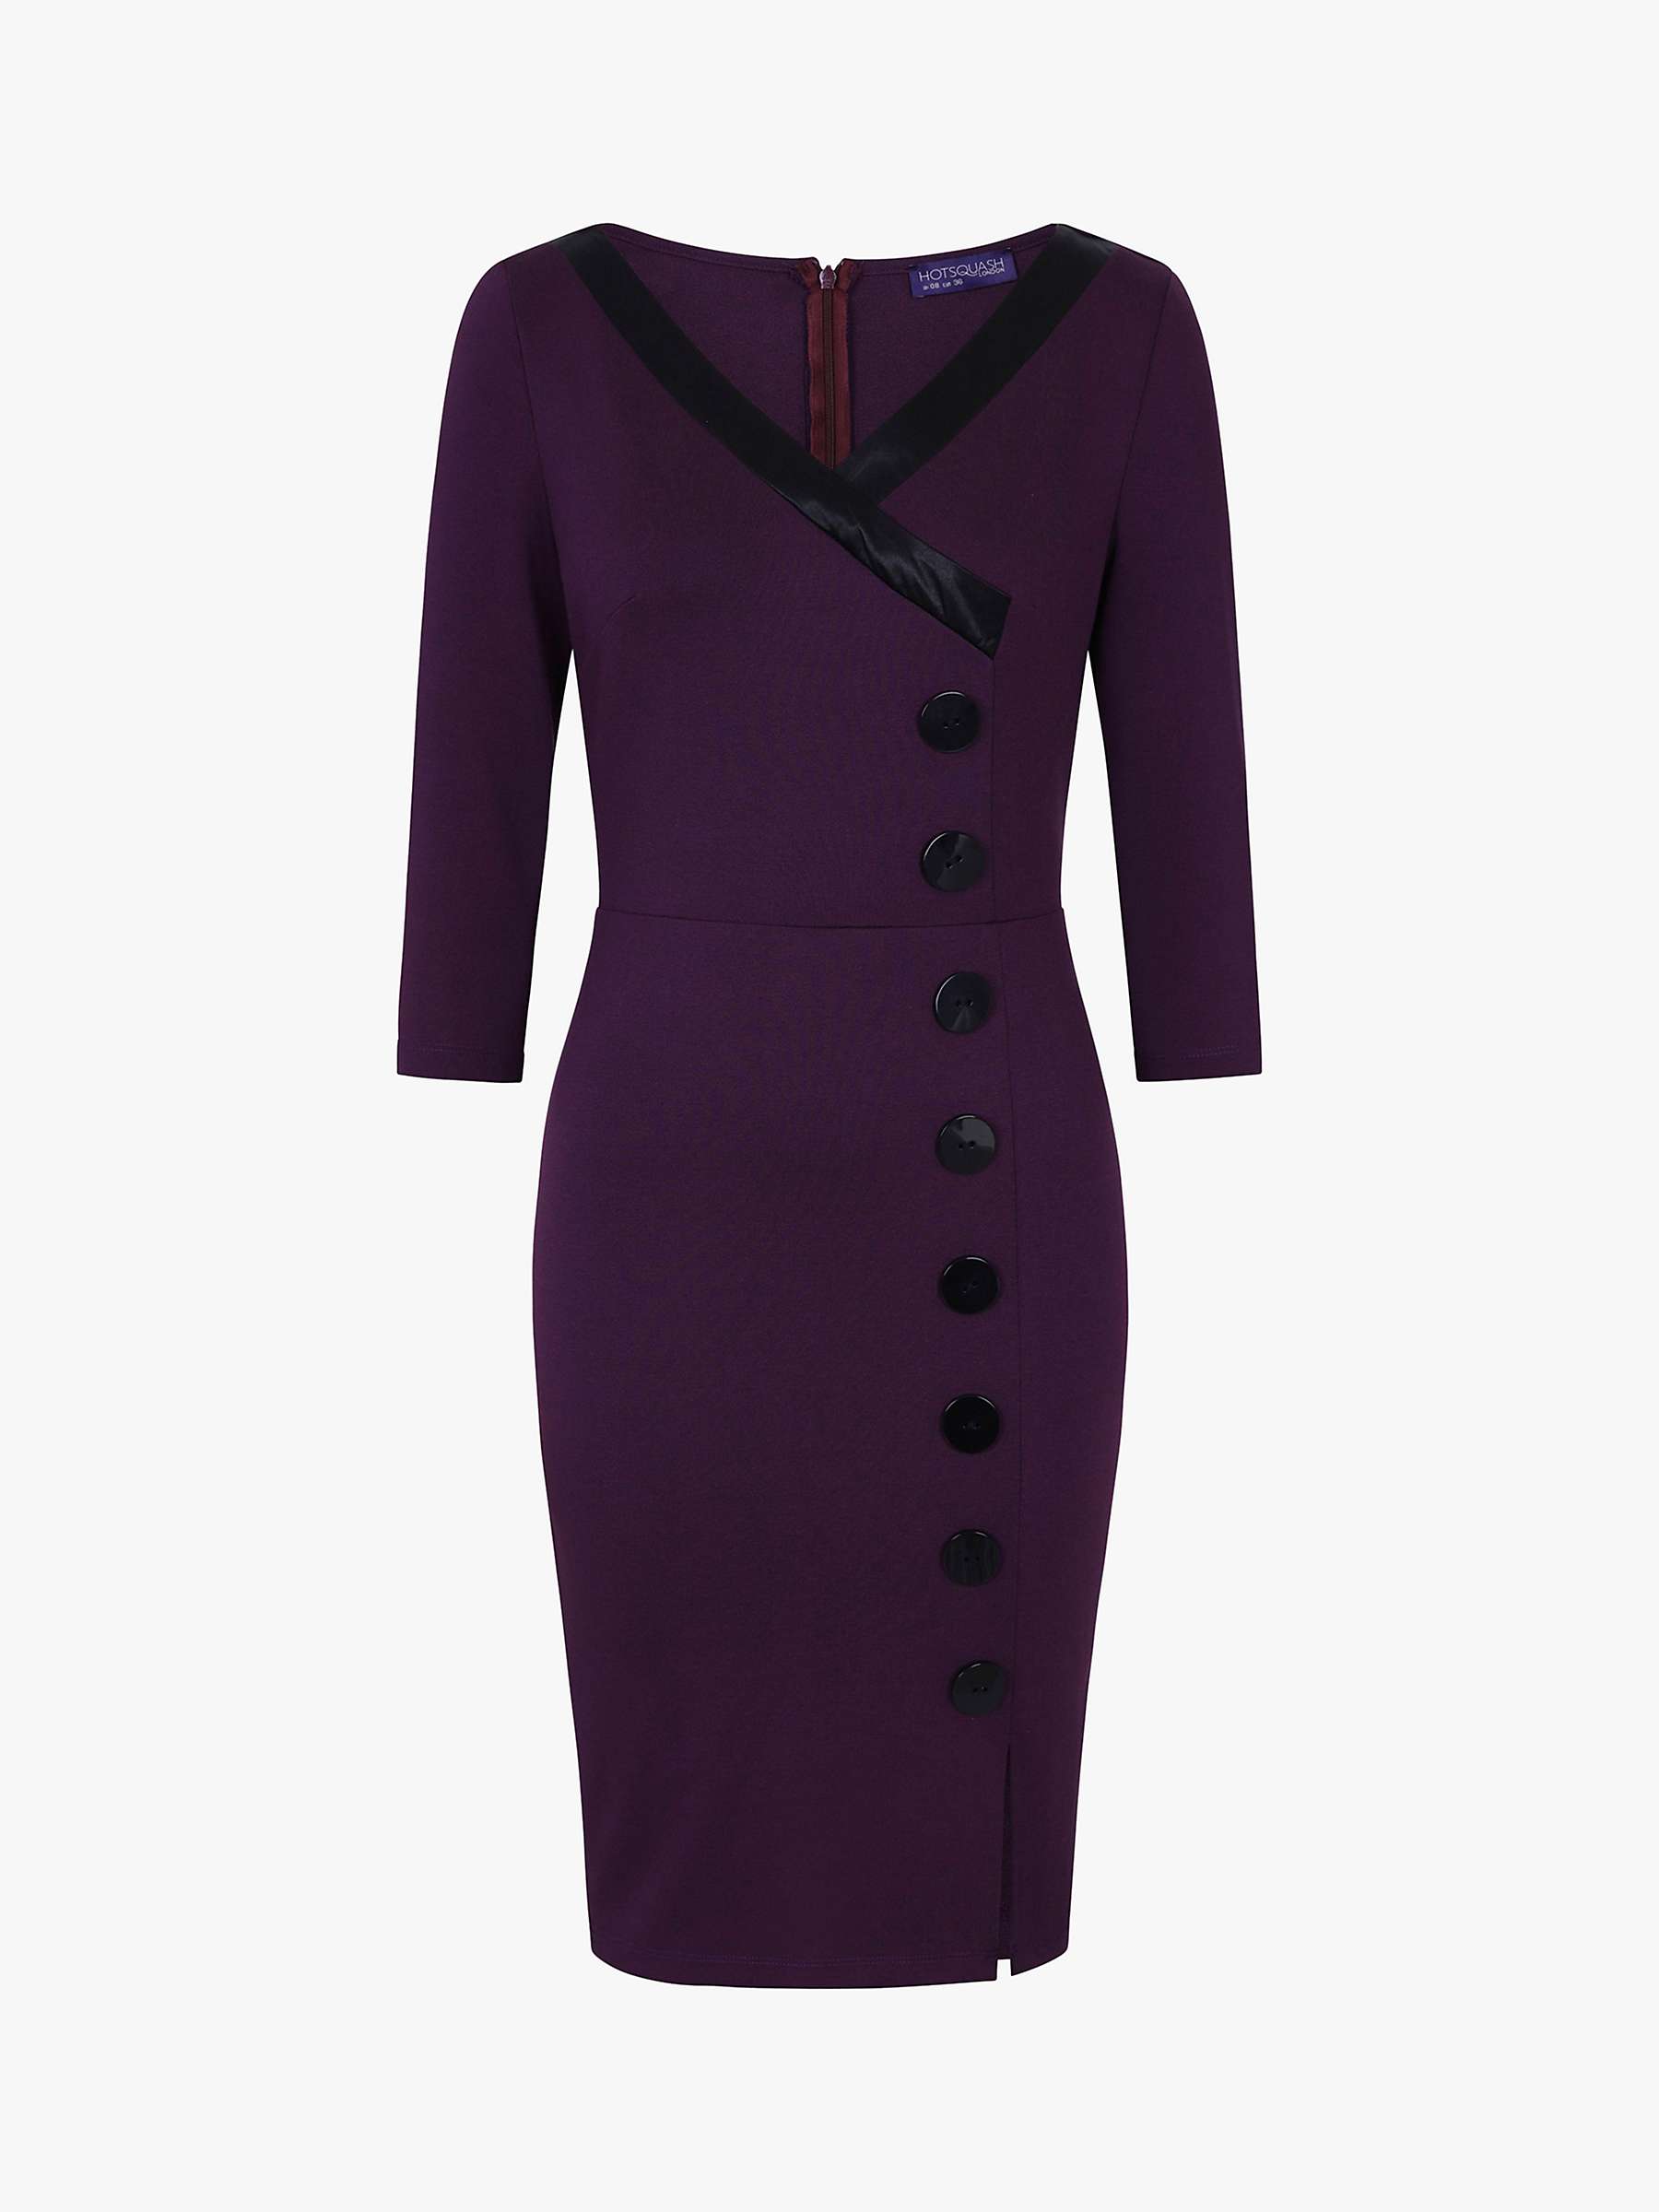 Buy HotSquash 50s Silky Trimmed Button Wiggle Dress Online at johnlewis.com